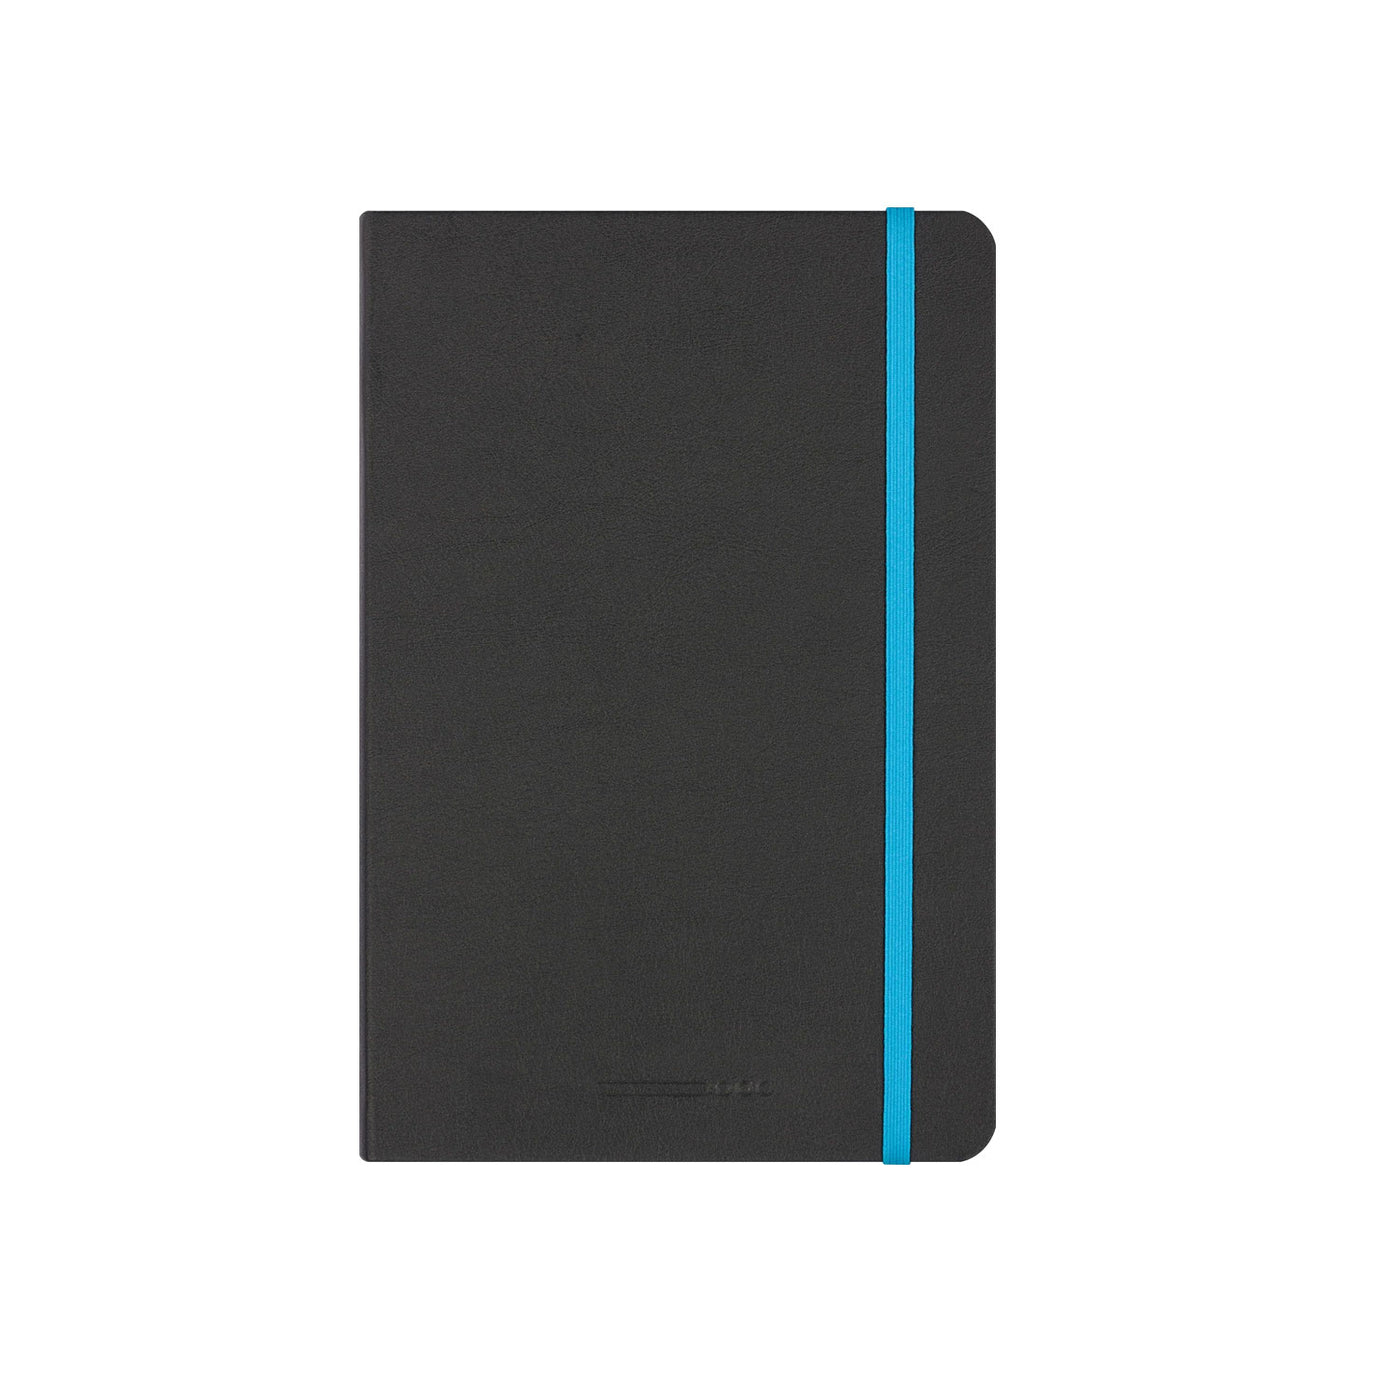 Endless Recorder Infinite Space Black Regalia Notebook - A5 Ruled 3